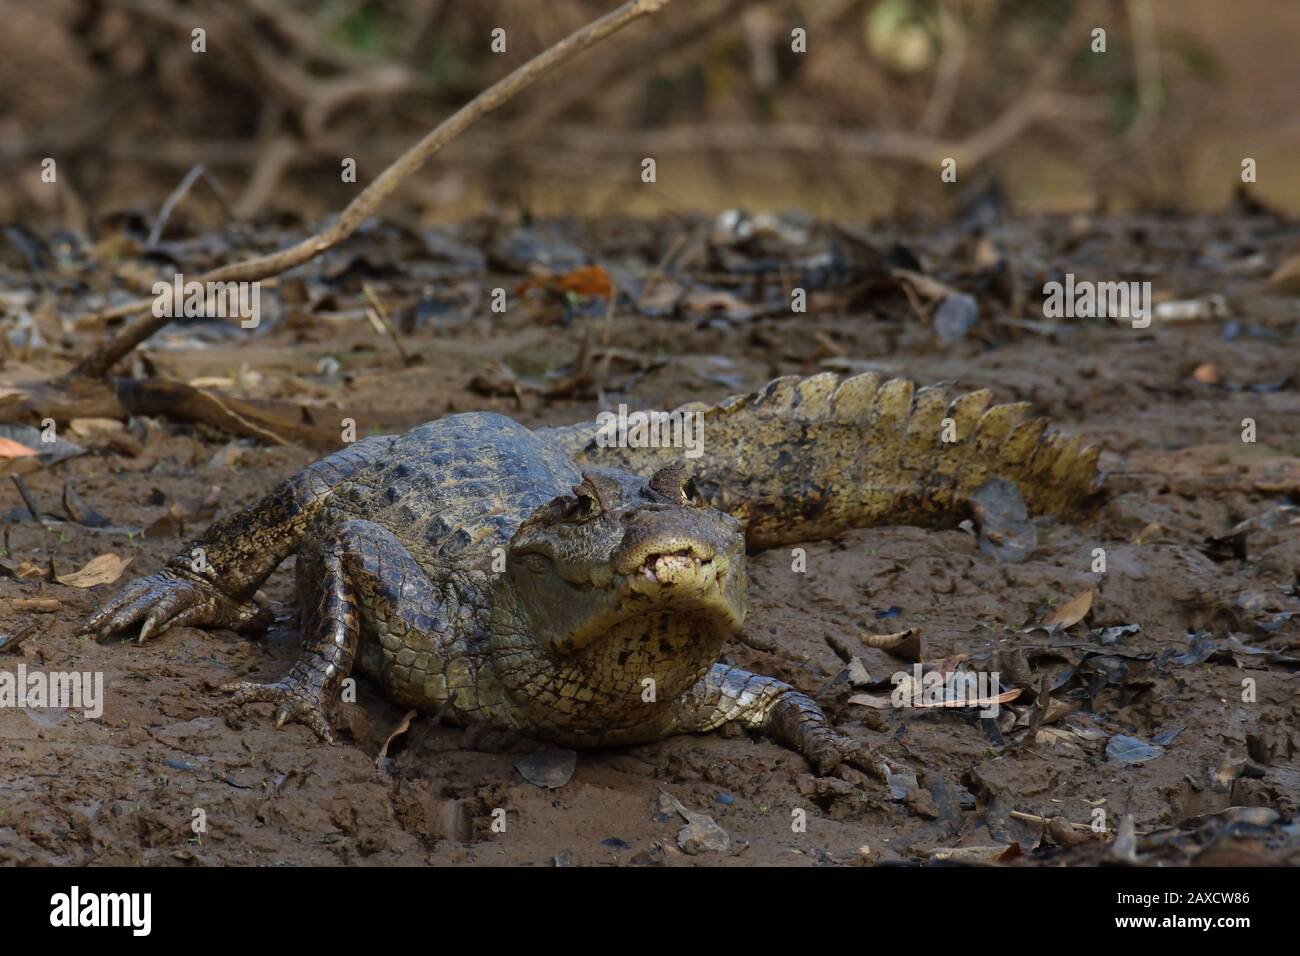 Spectacled Caiman in Costa Rica Swamp Stock Photo